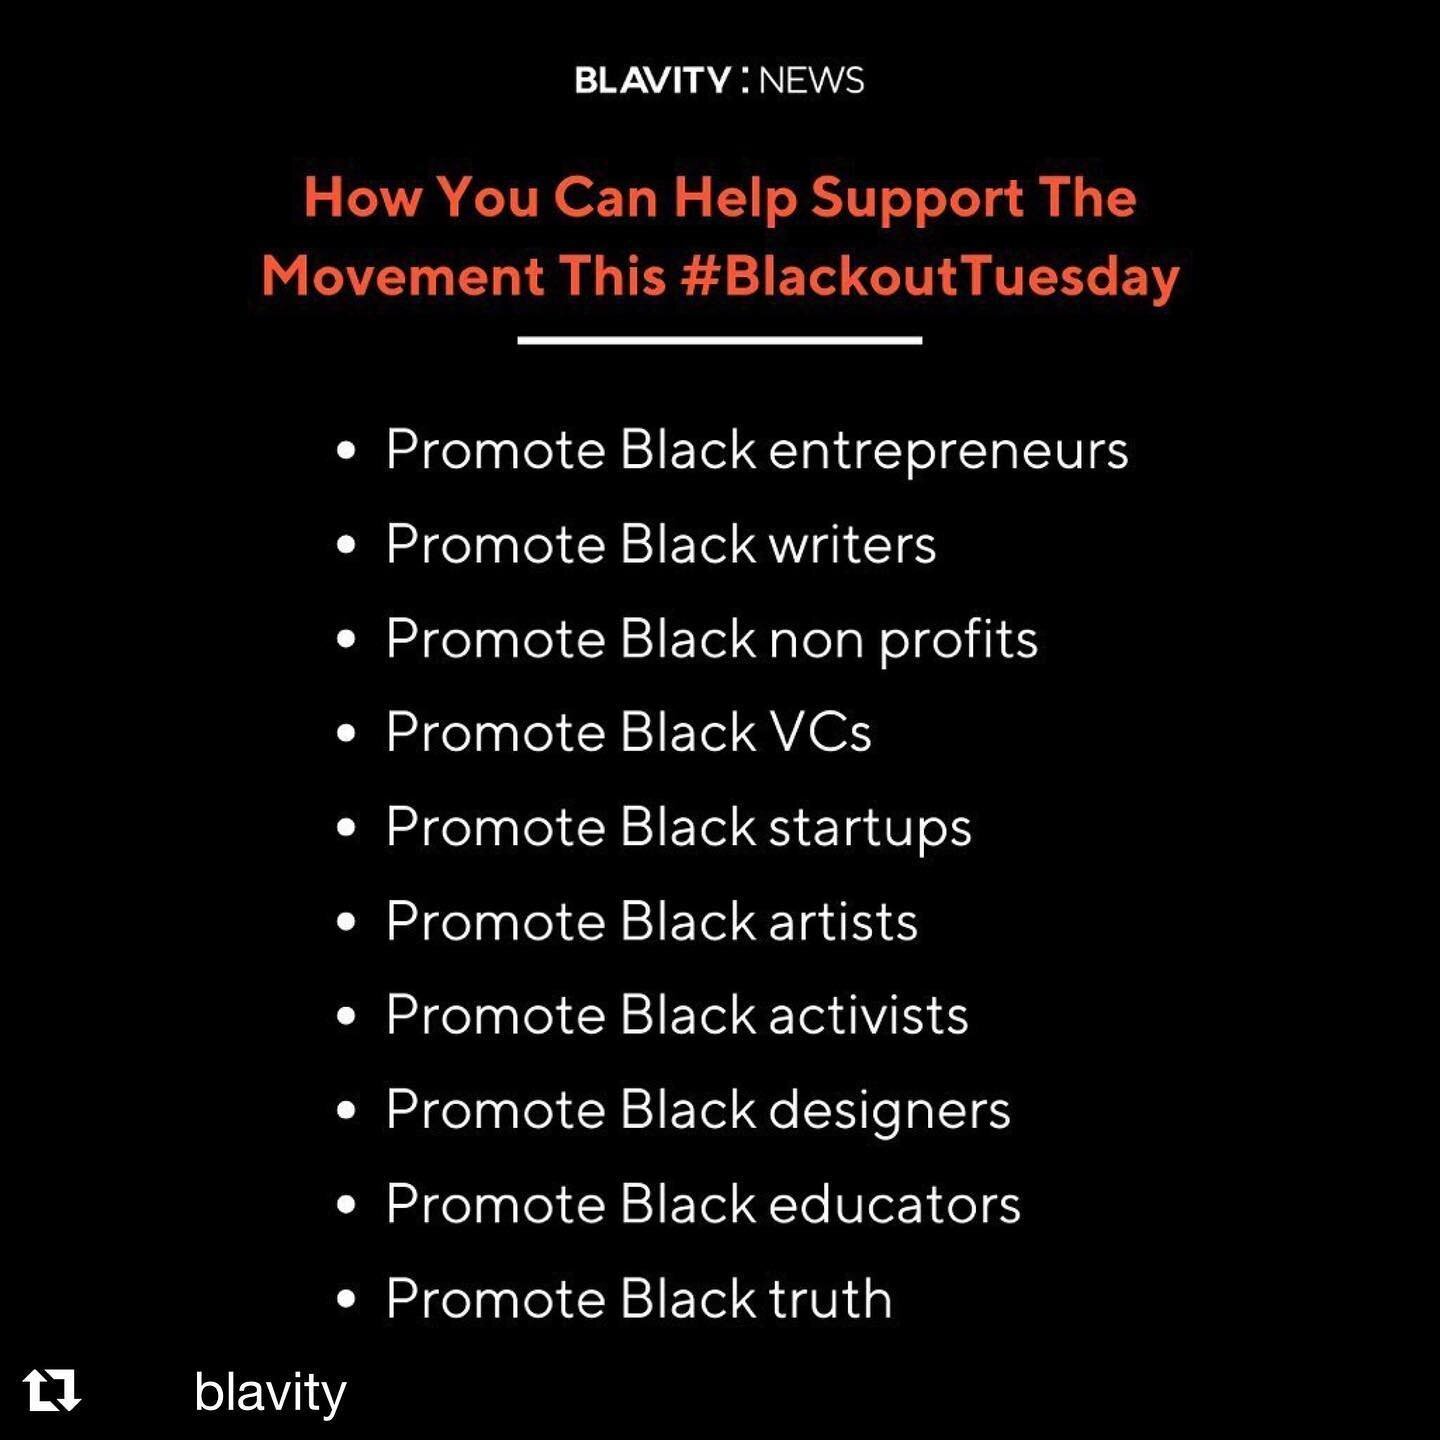 #Repost @blavity with @get_repost
・・・
We've been silenced for far too long. This #BlackOutTuesday, let's make our voices heard. || ✊🏾 @morgandebaun